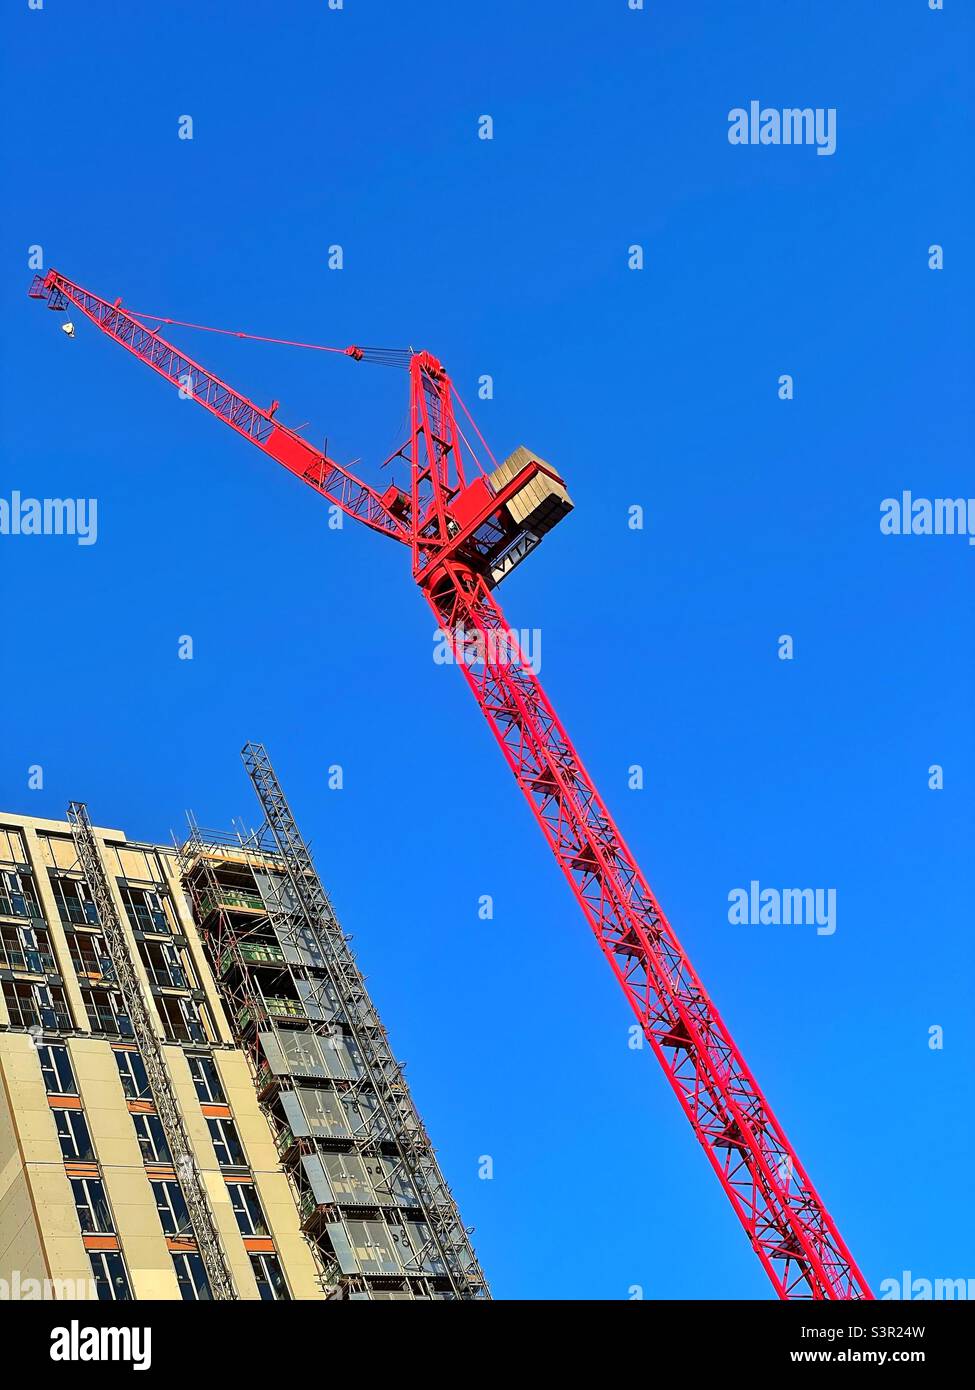 Large red crane against a blue sky, during construction of a tall building in a city. Stock Photo